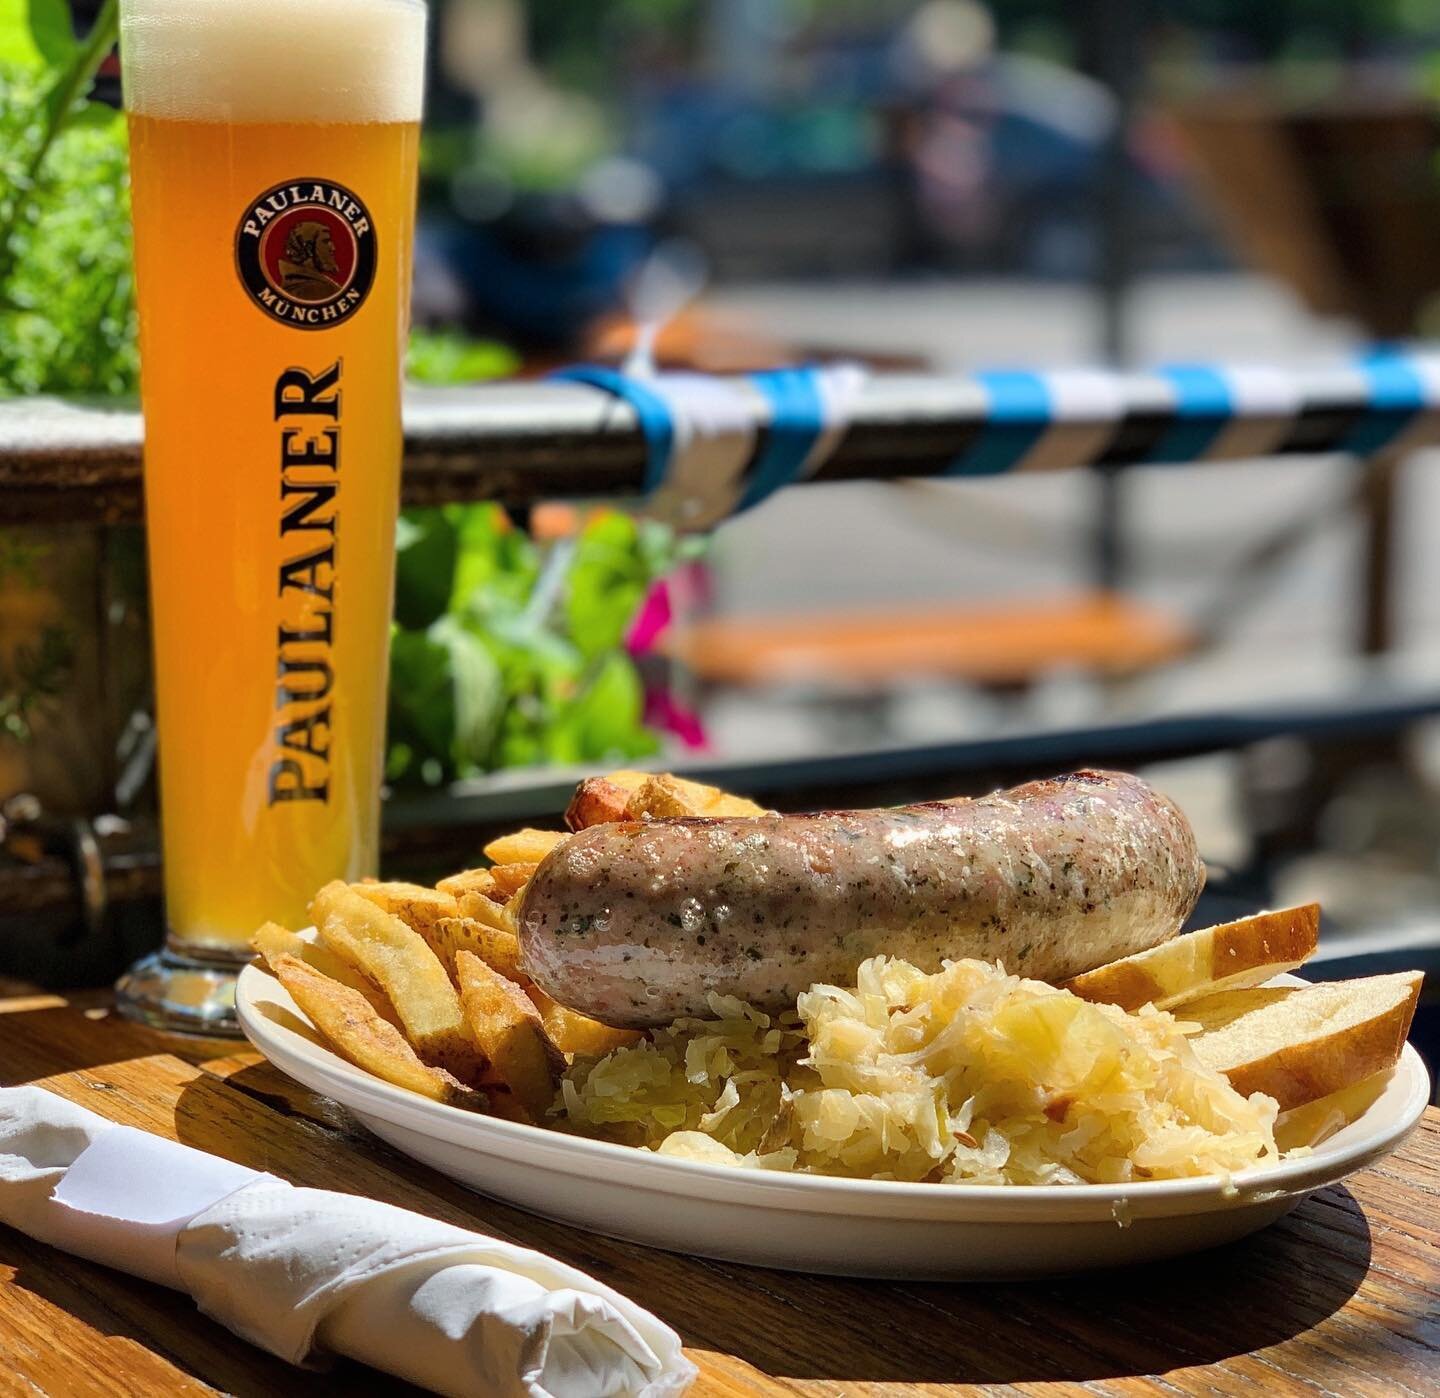 Soak up these last moments of patio weather with some sausage and beer. #patio #coloradosun #bier